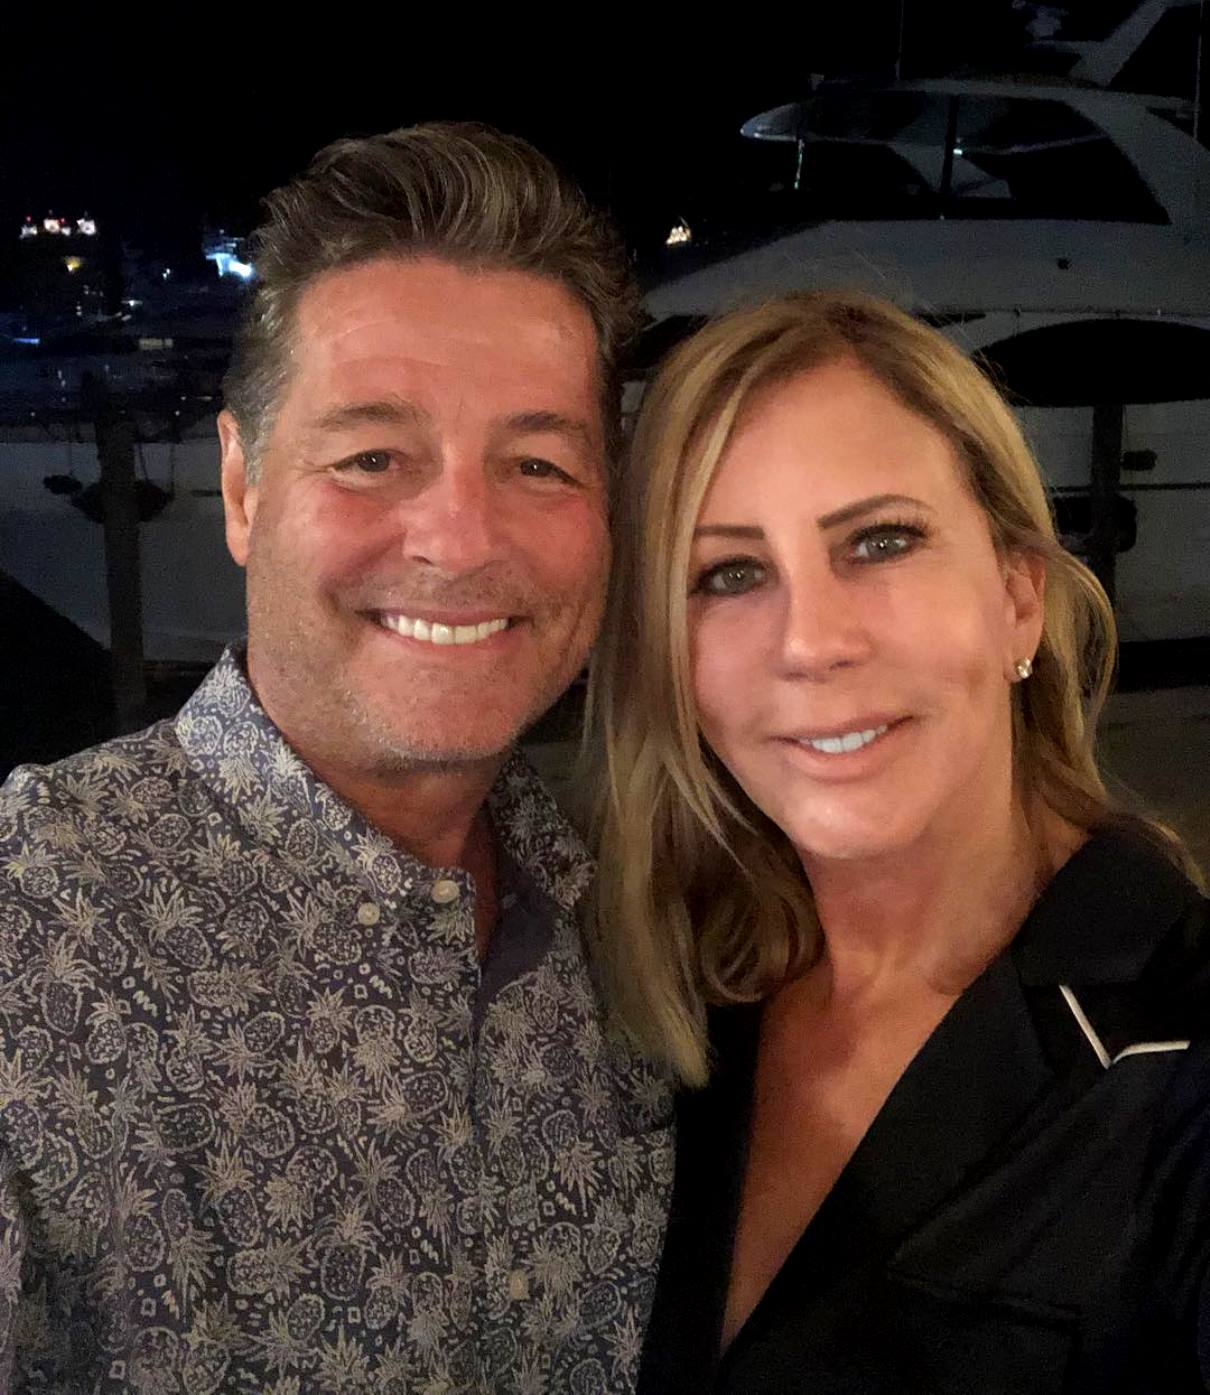 Vicki Gunvalson Must Get Engaged to Steve Lodge If She Wants a Full-Time Role on RHOC, Plus Did She Get More Plastic Surgery?